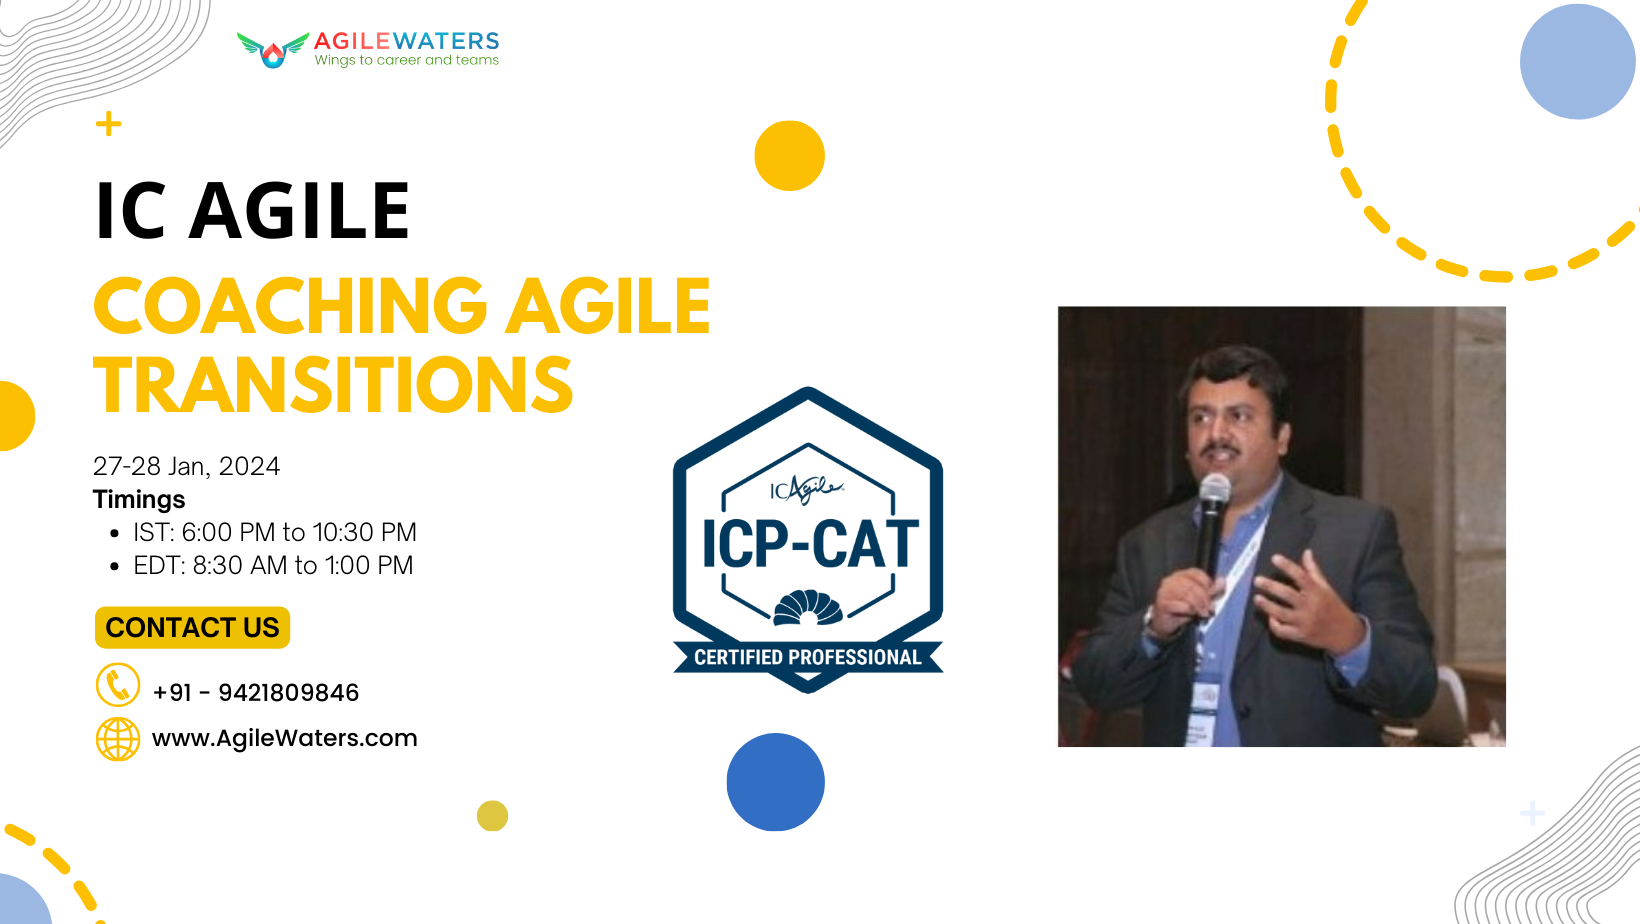 ICAgile-Coaching Agile Transitions, Online Event